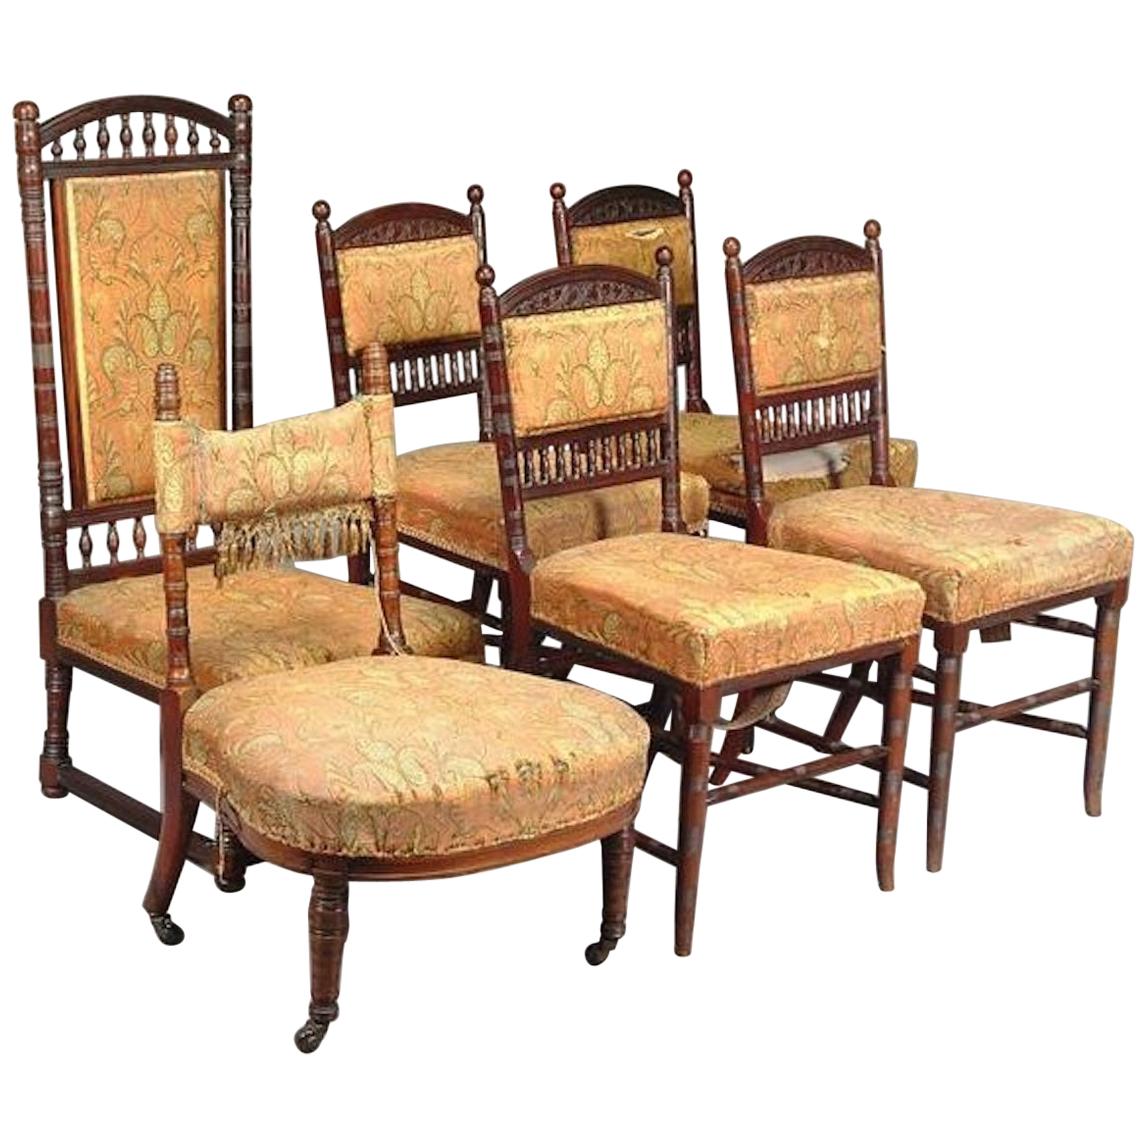 Thomas Edward Collcutt, Collinson & Lock A Six-Piece Rosewood Drawing Room Suite For Sale